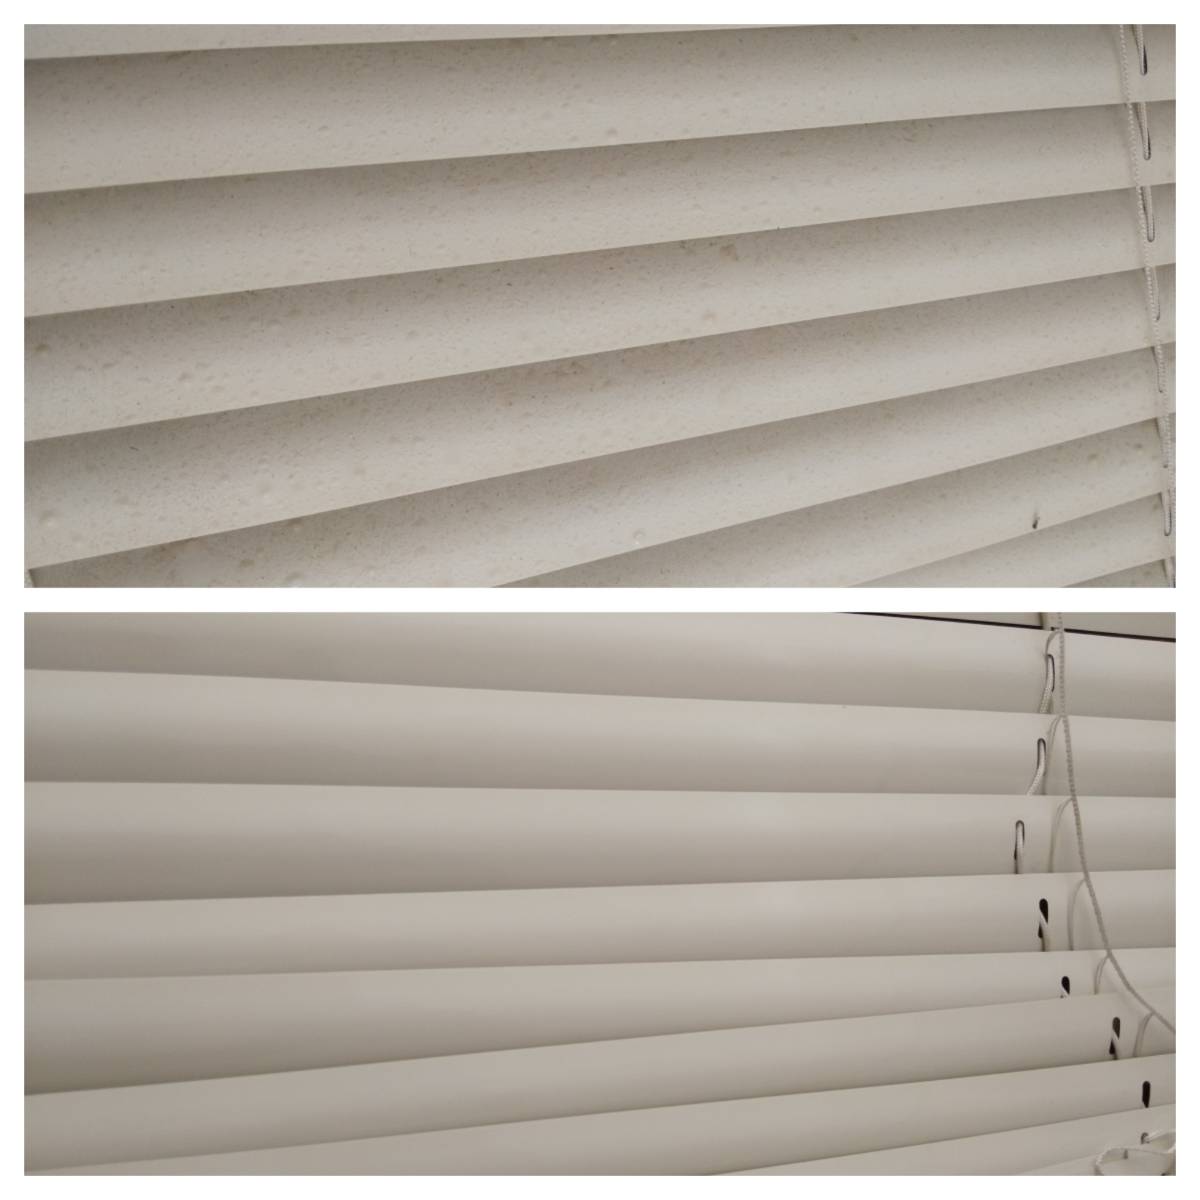 Clean blinds!